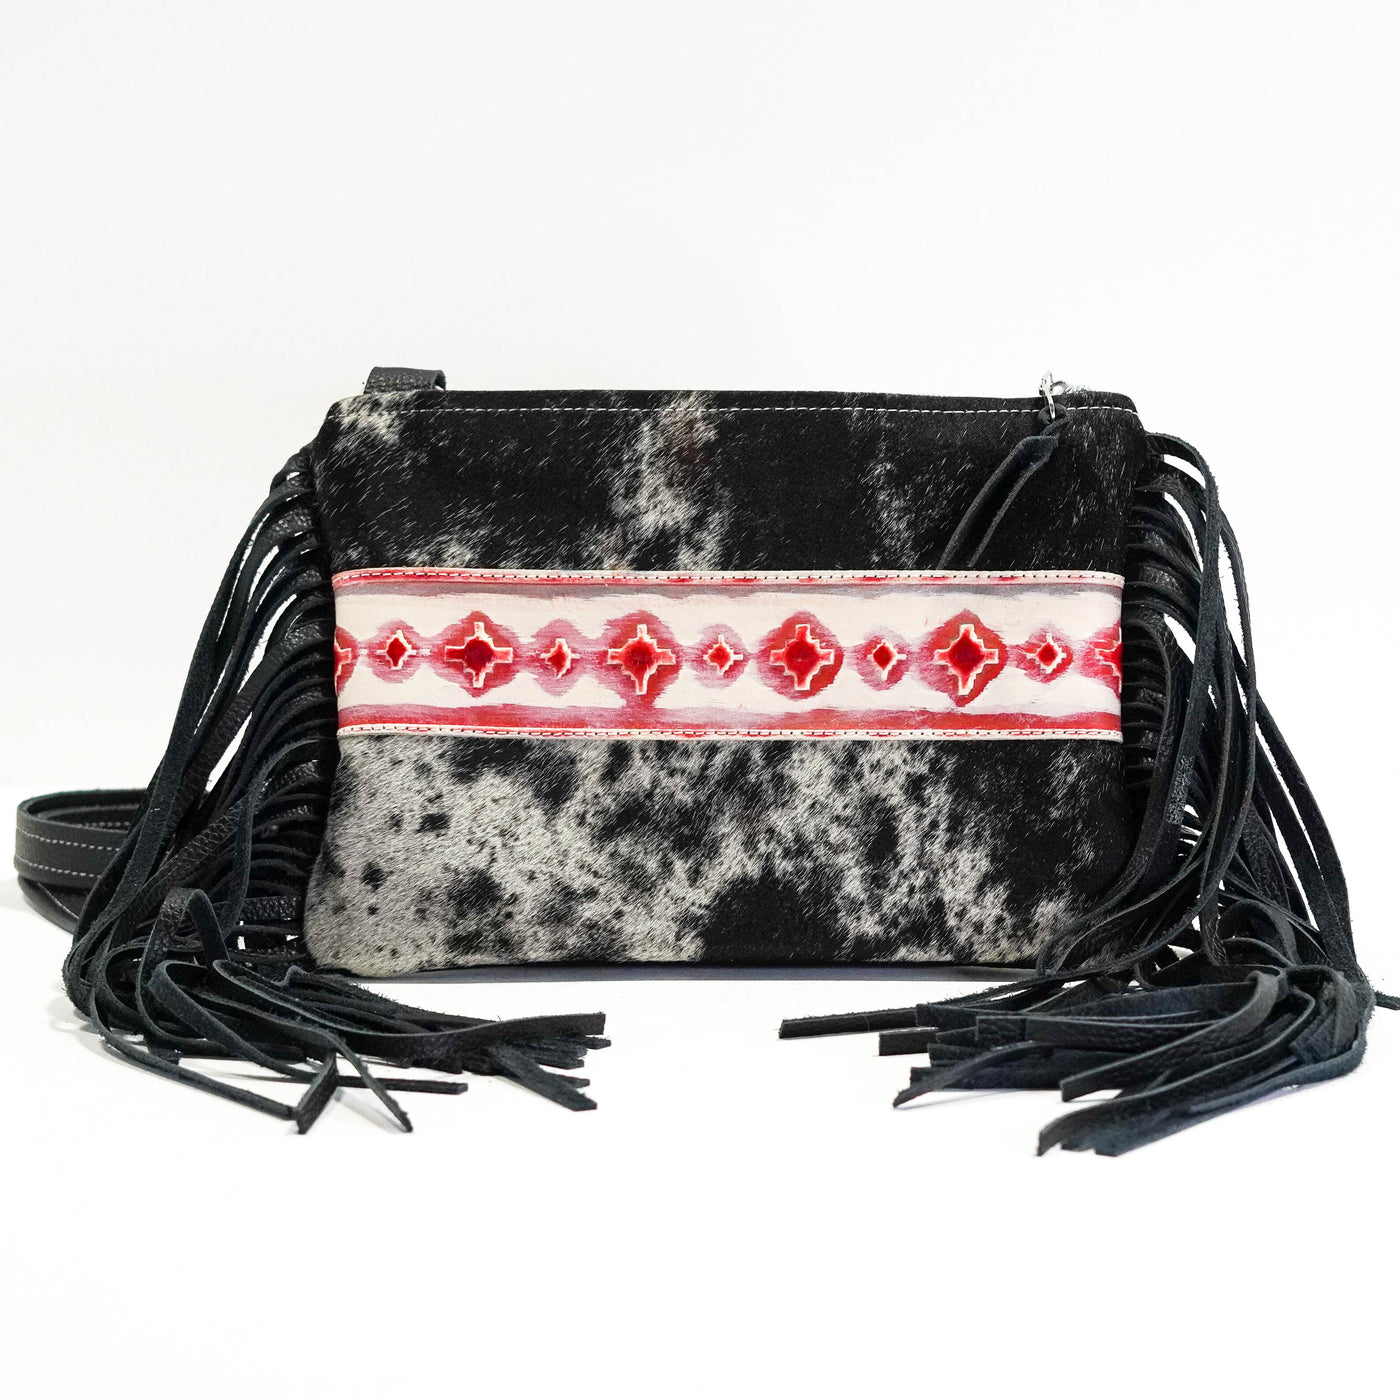 Patsy - Black & White w/ Royston Navajo-Patsy-Western-Cowhide-Bags-Handmade-Products-Gifts-Dancing Cactus Designs